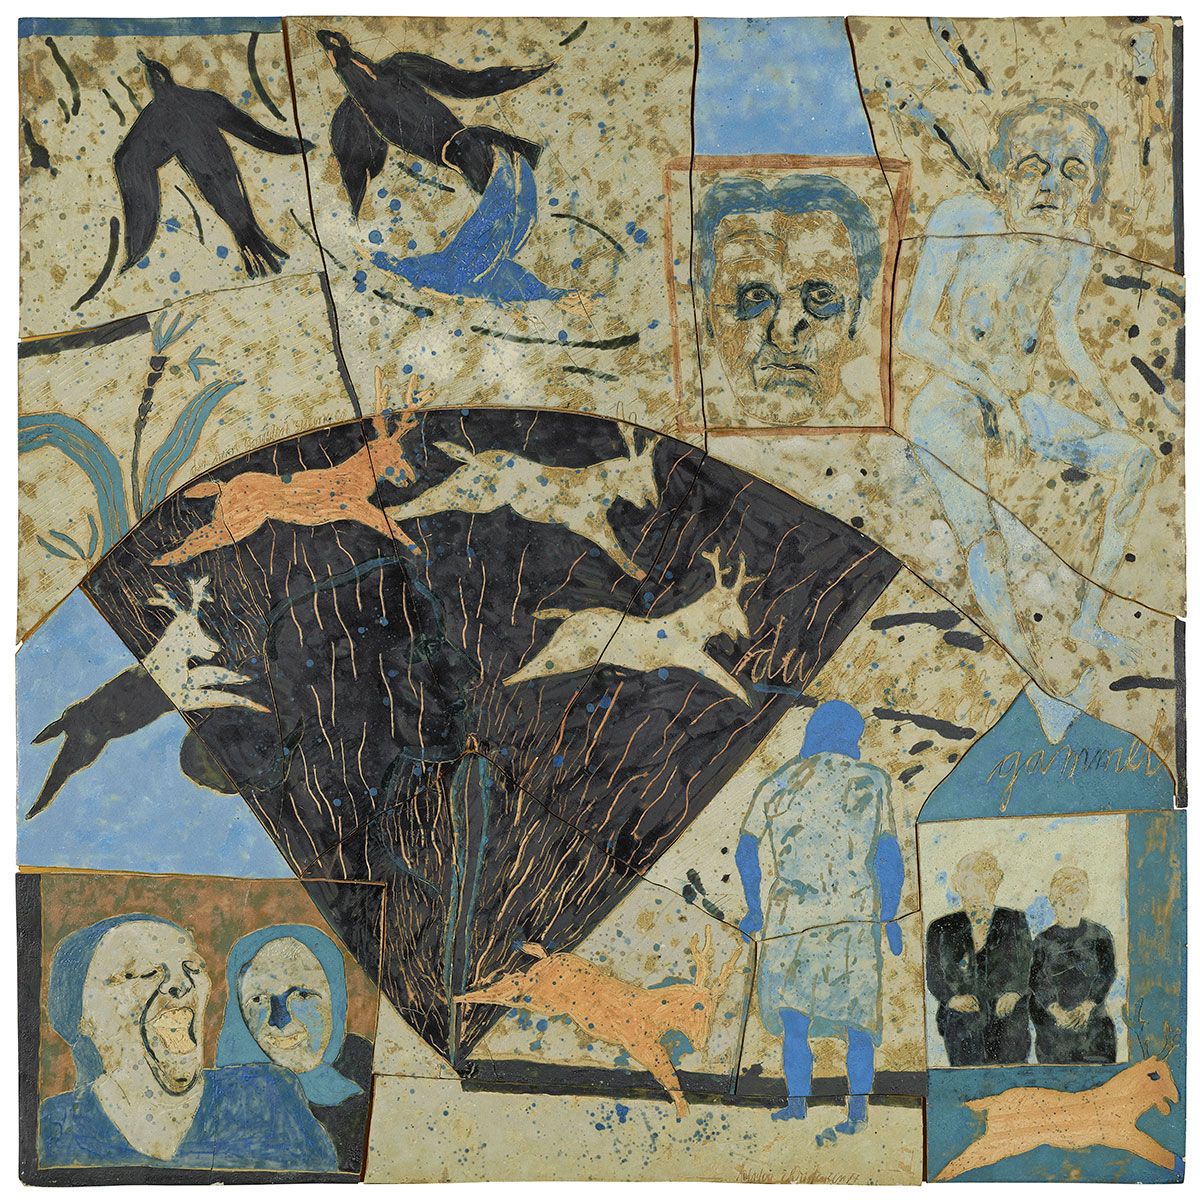 Kirsten Christensen, <i>You Yourself Will Grow Old</i>, 1977<br>Glazed tiles, stoneware. 128 x 125 cm<br>Purchased 1978. Inv.nr. 1978-001. ©The artist. Photo: Ole Mortensen